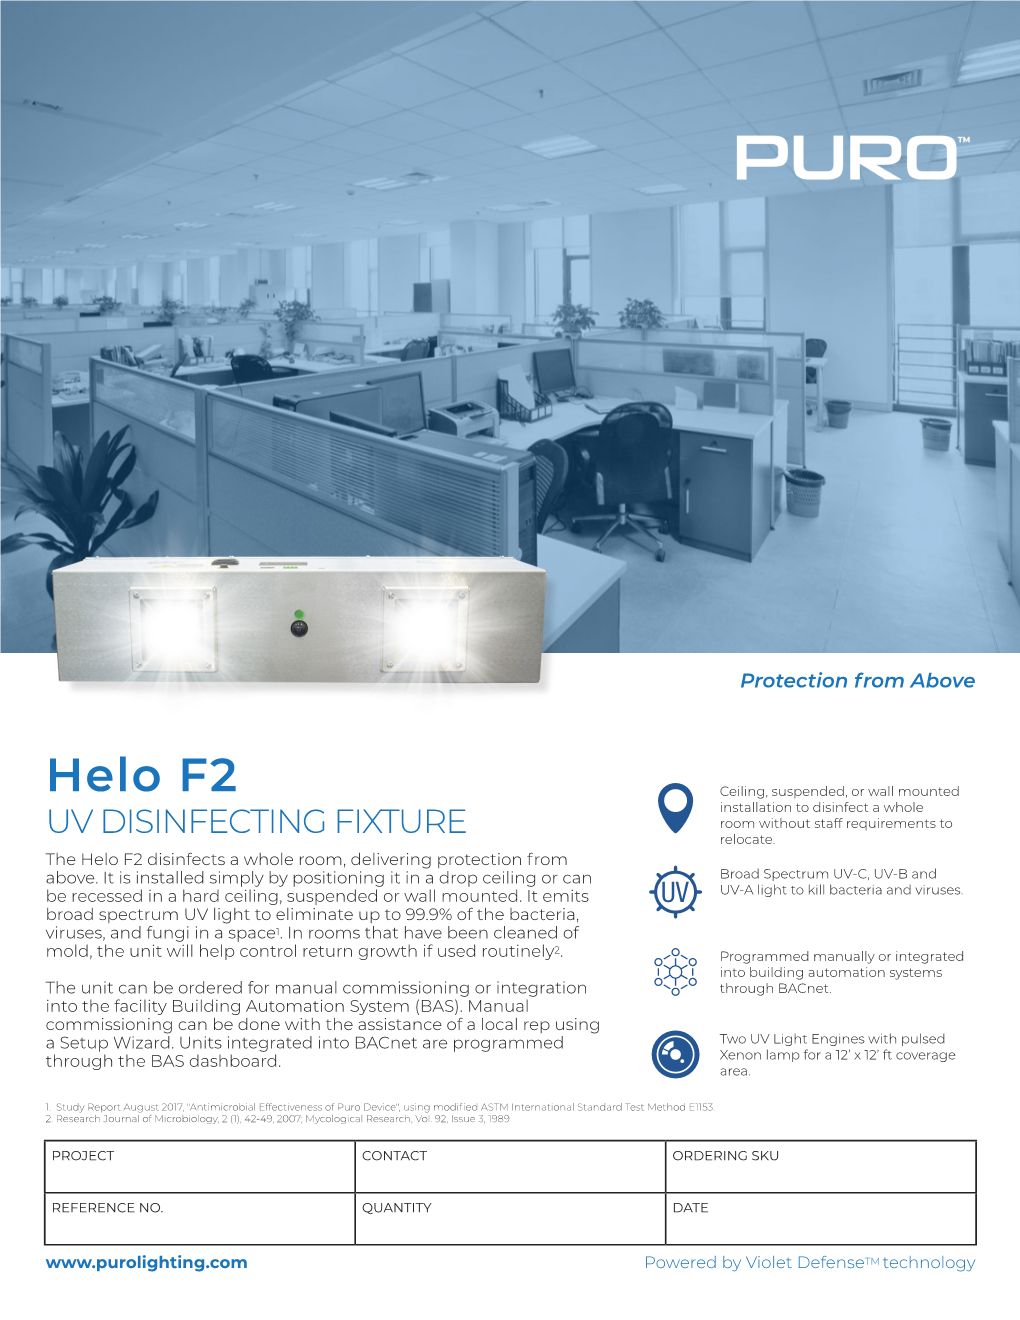 Helo F2 Ceiling, Suspended, Or Wall Mounted Installation to Disinfect a Whole Room Without Staff Requirements to UV DISINFECTING FIXTURE Relocate